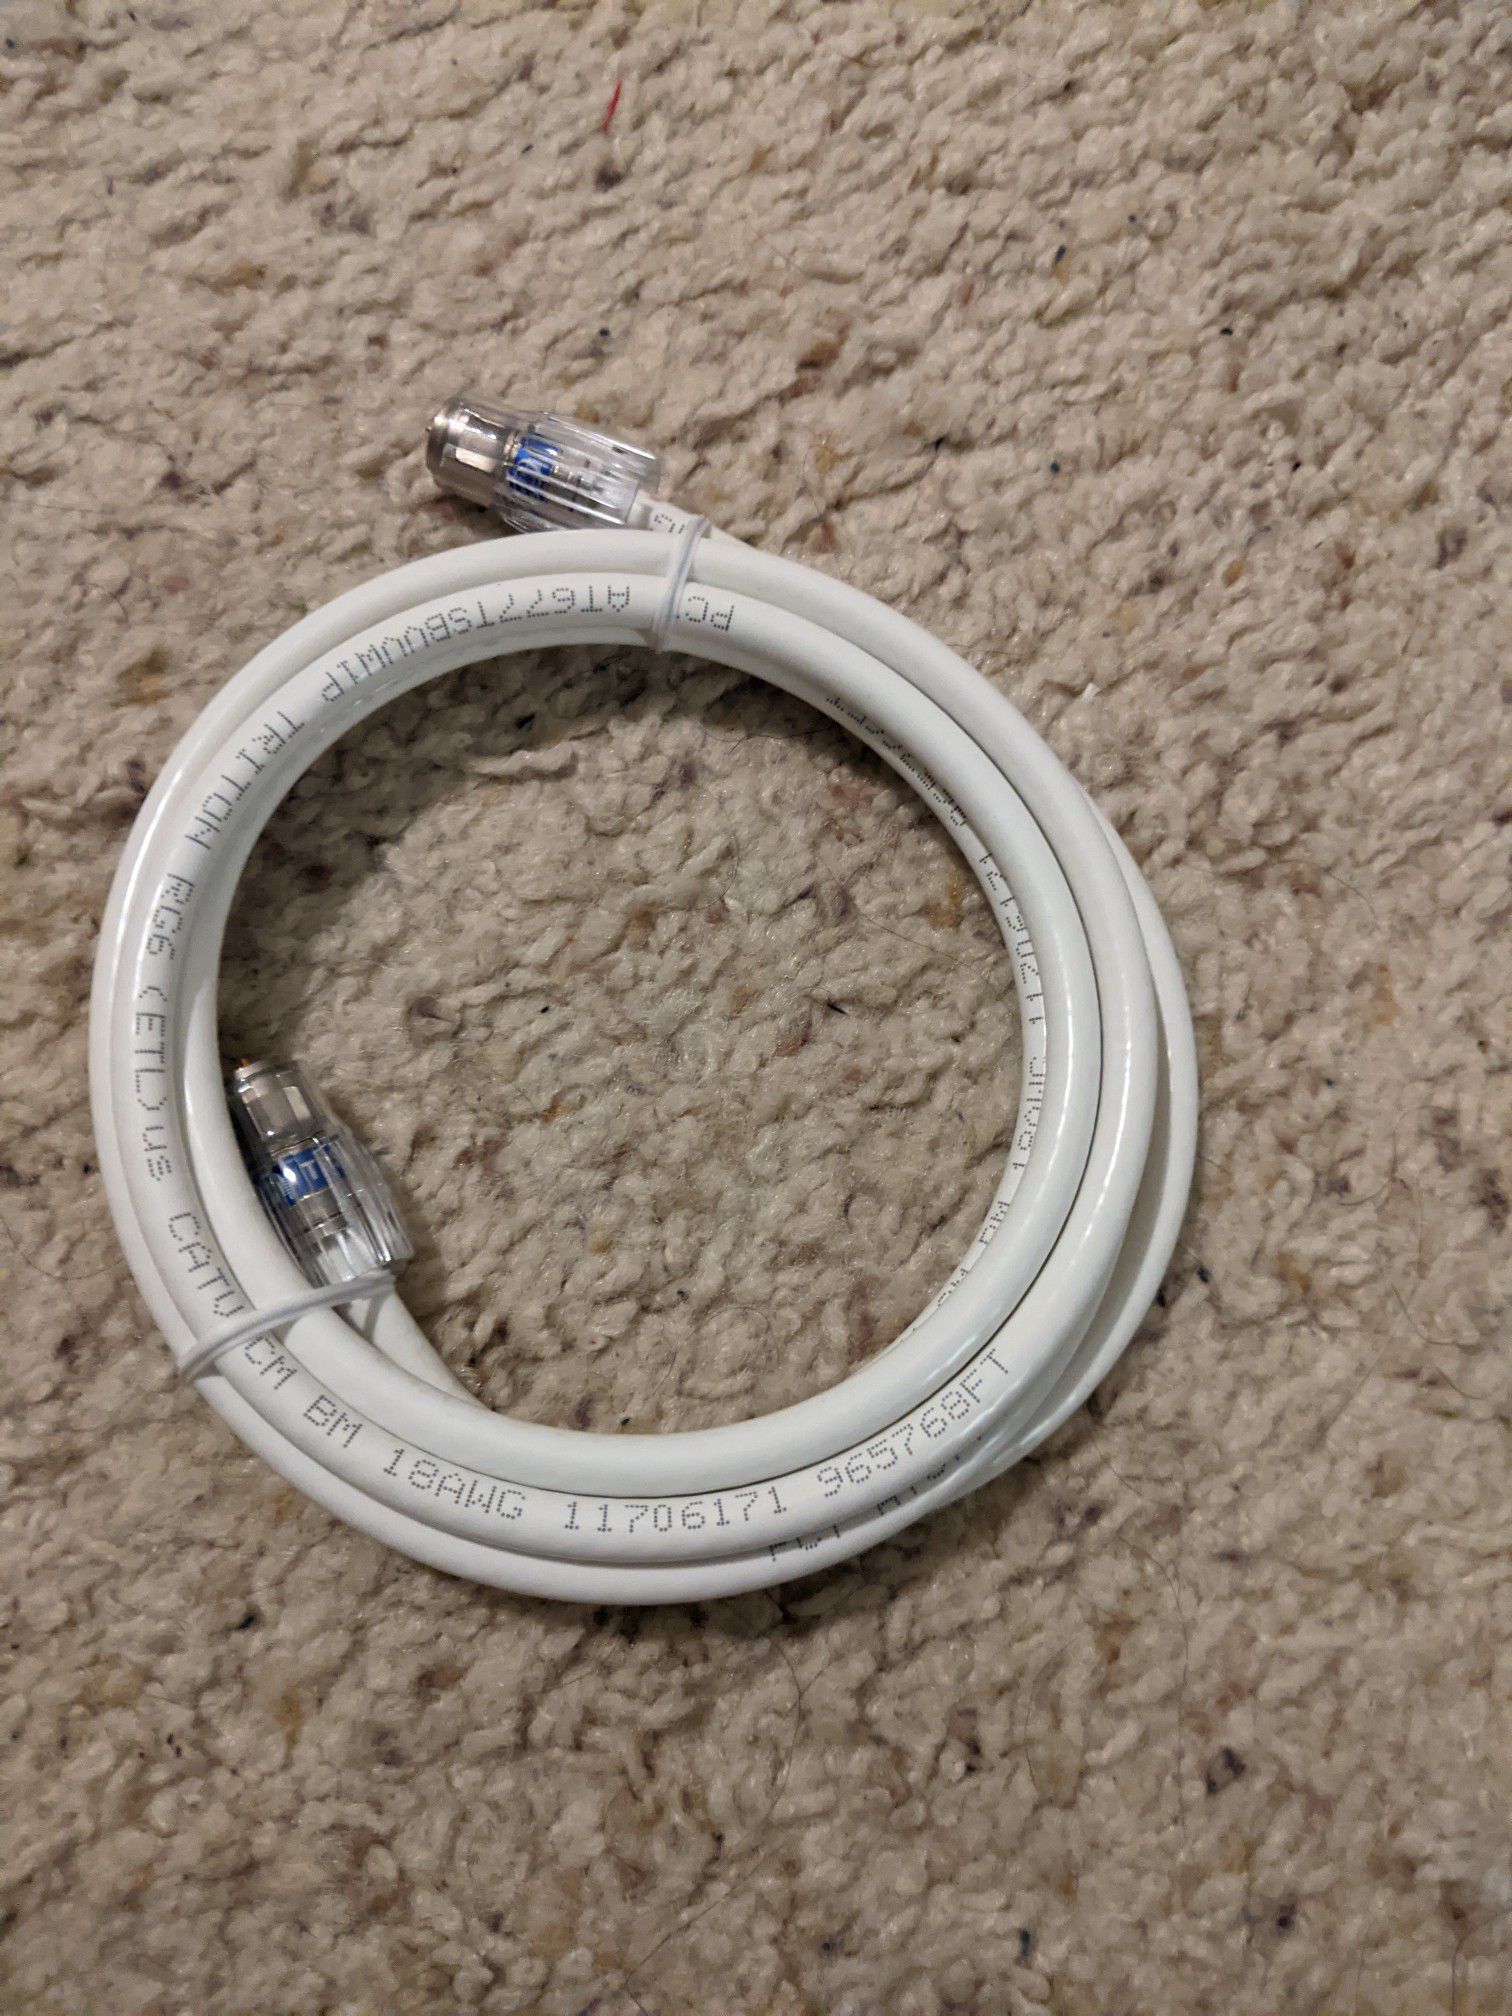 Coaxial Cable (never used)